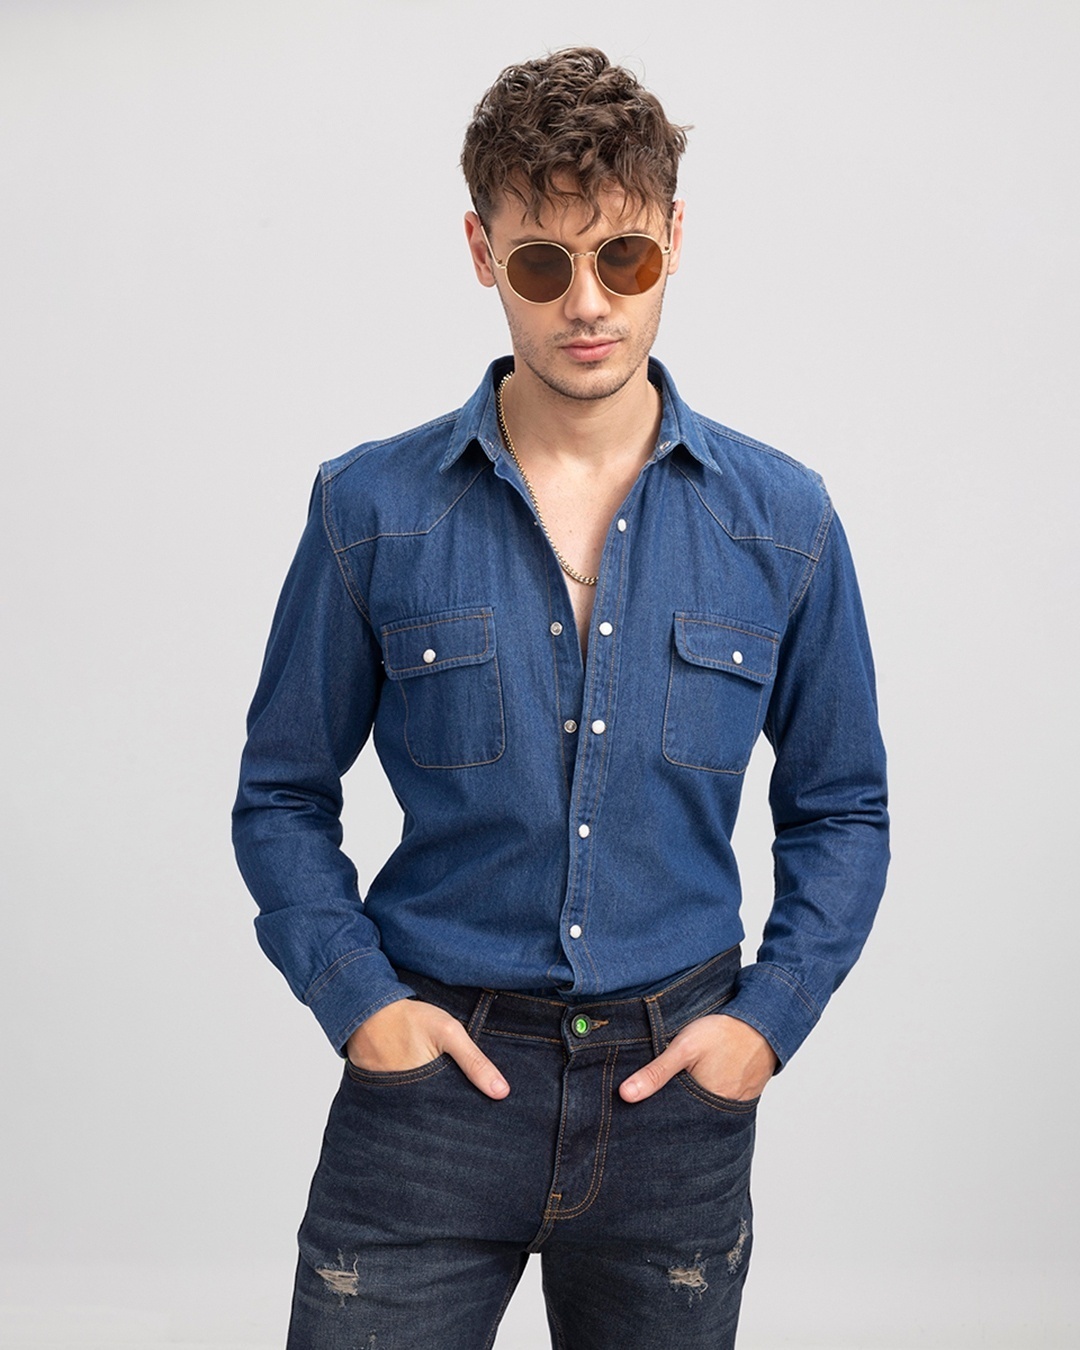 Axels Premium Denim Roper Western Snap Shirt in Anthracite | Axel's of Vail